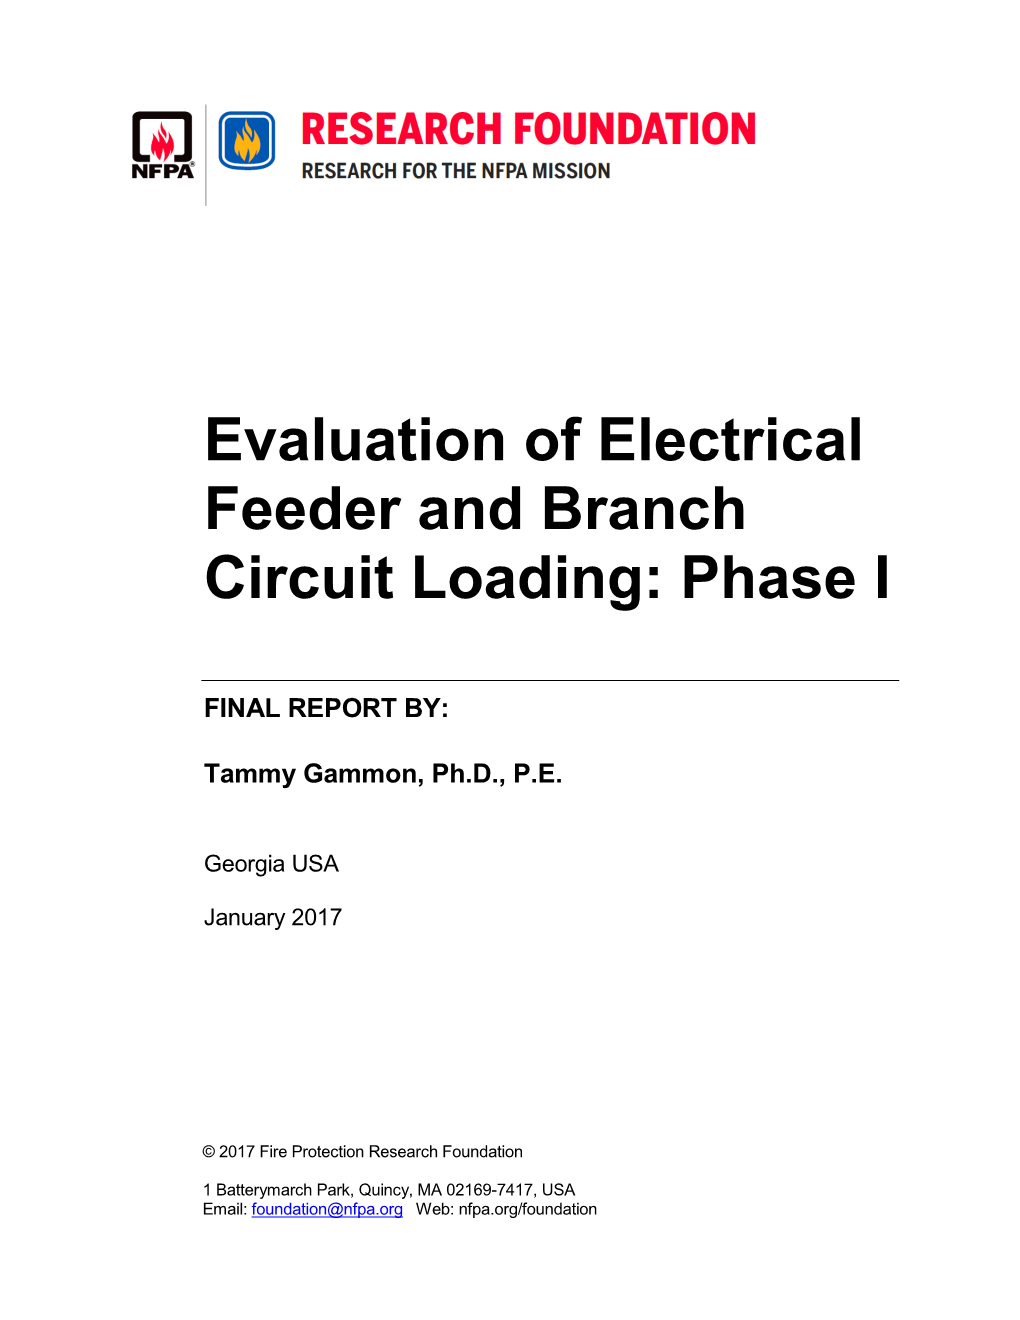 Evaluation of Electrical Feeder and Branch Circuit Loading: Phase I